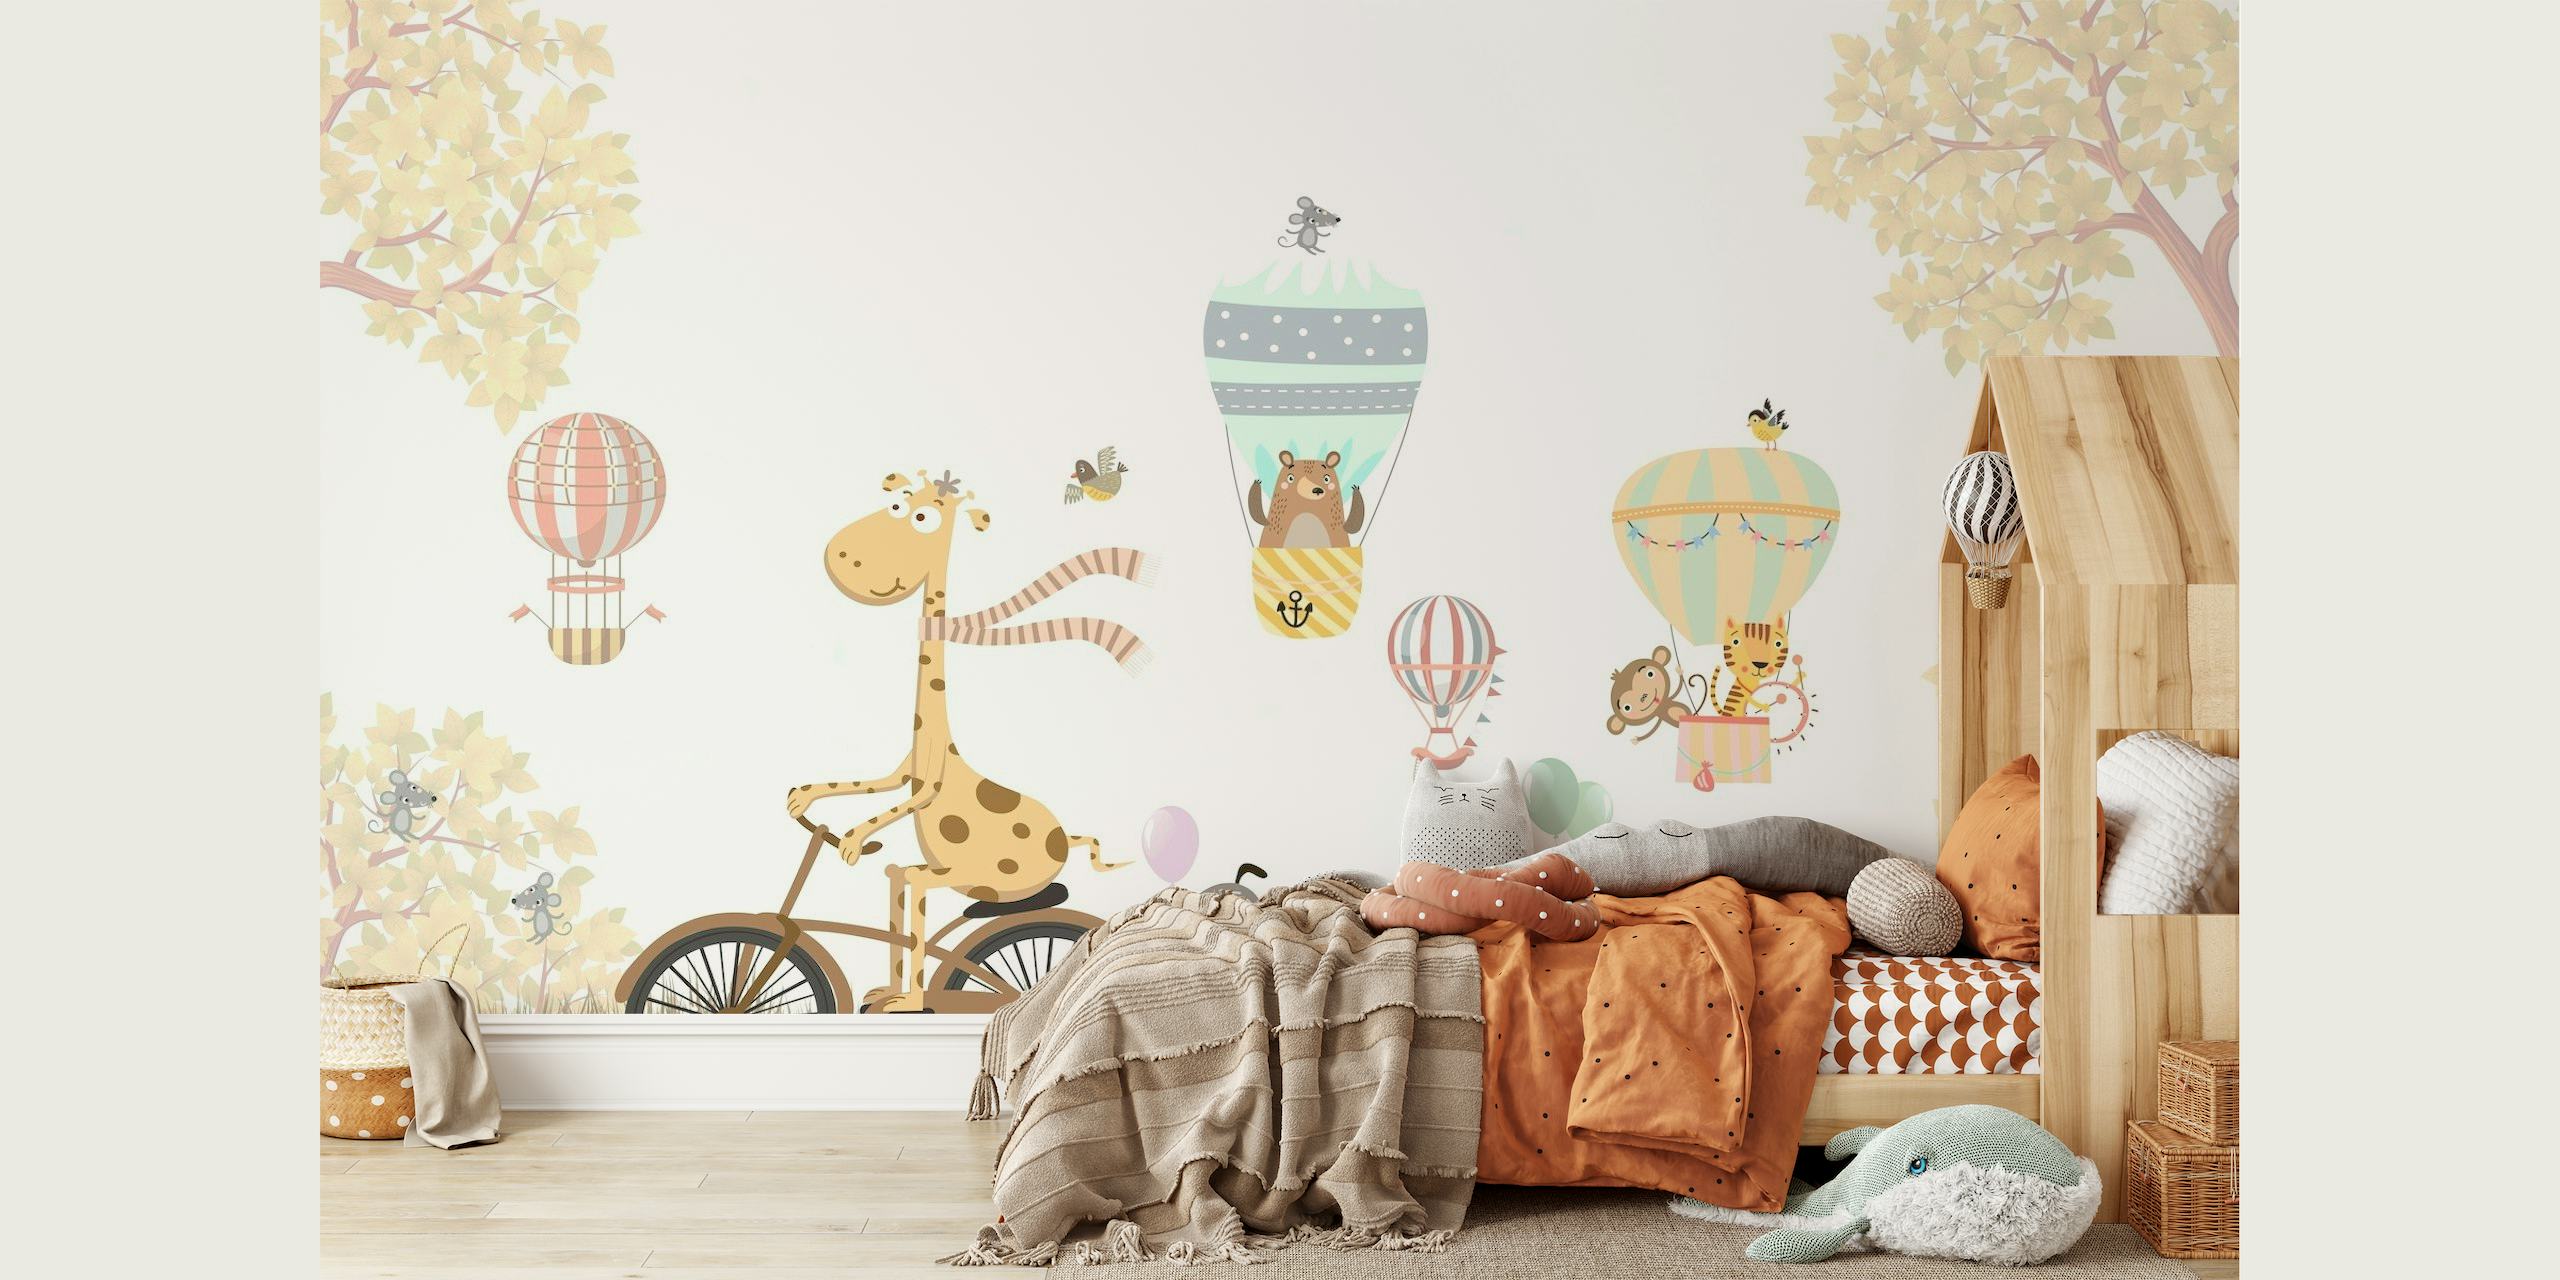 Illustration of animals on a bicycle and hot air balloons in a pastel-colored landscape wall mural